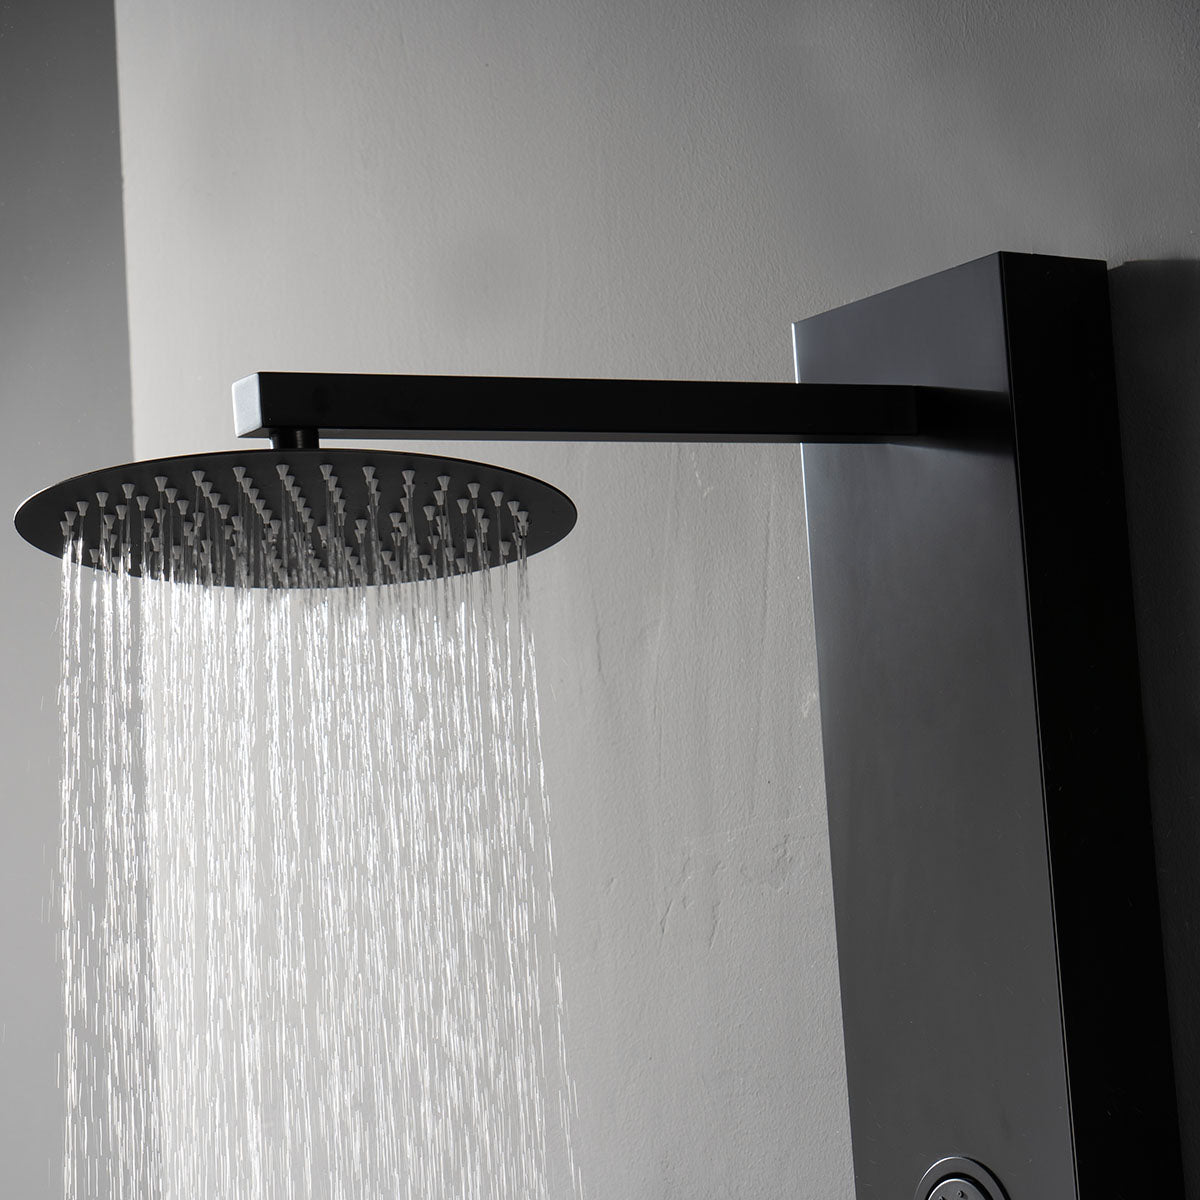 SP-5654MB Stainless Steel Shower Panel (Matte Black) - iStyle Bath